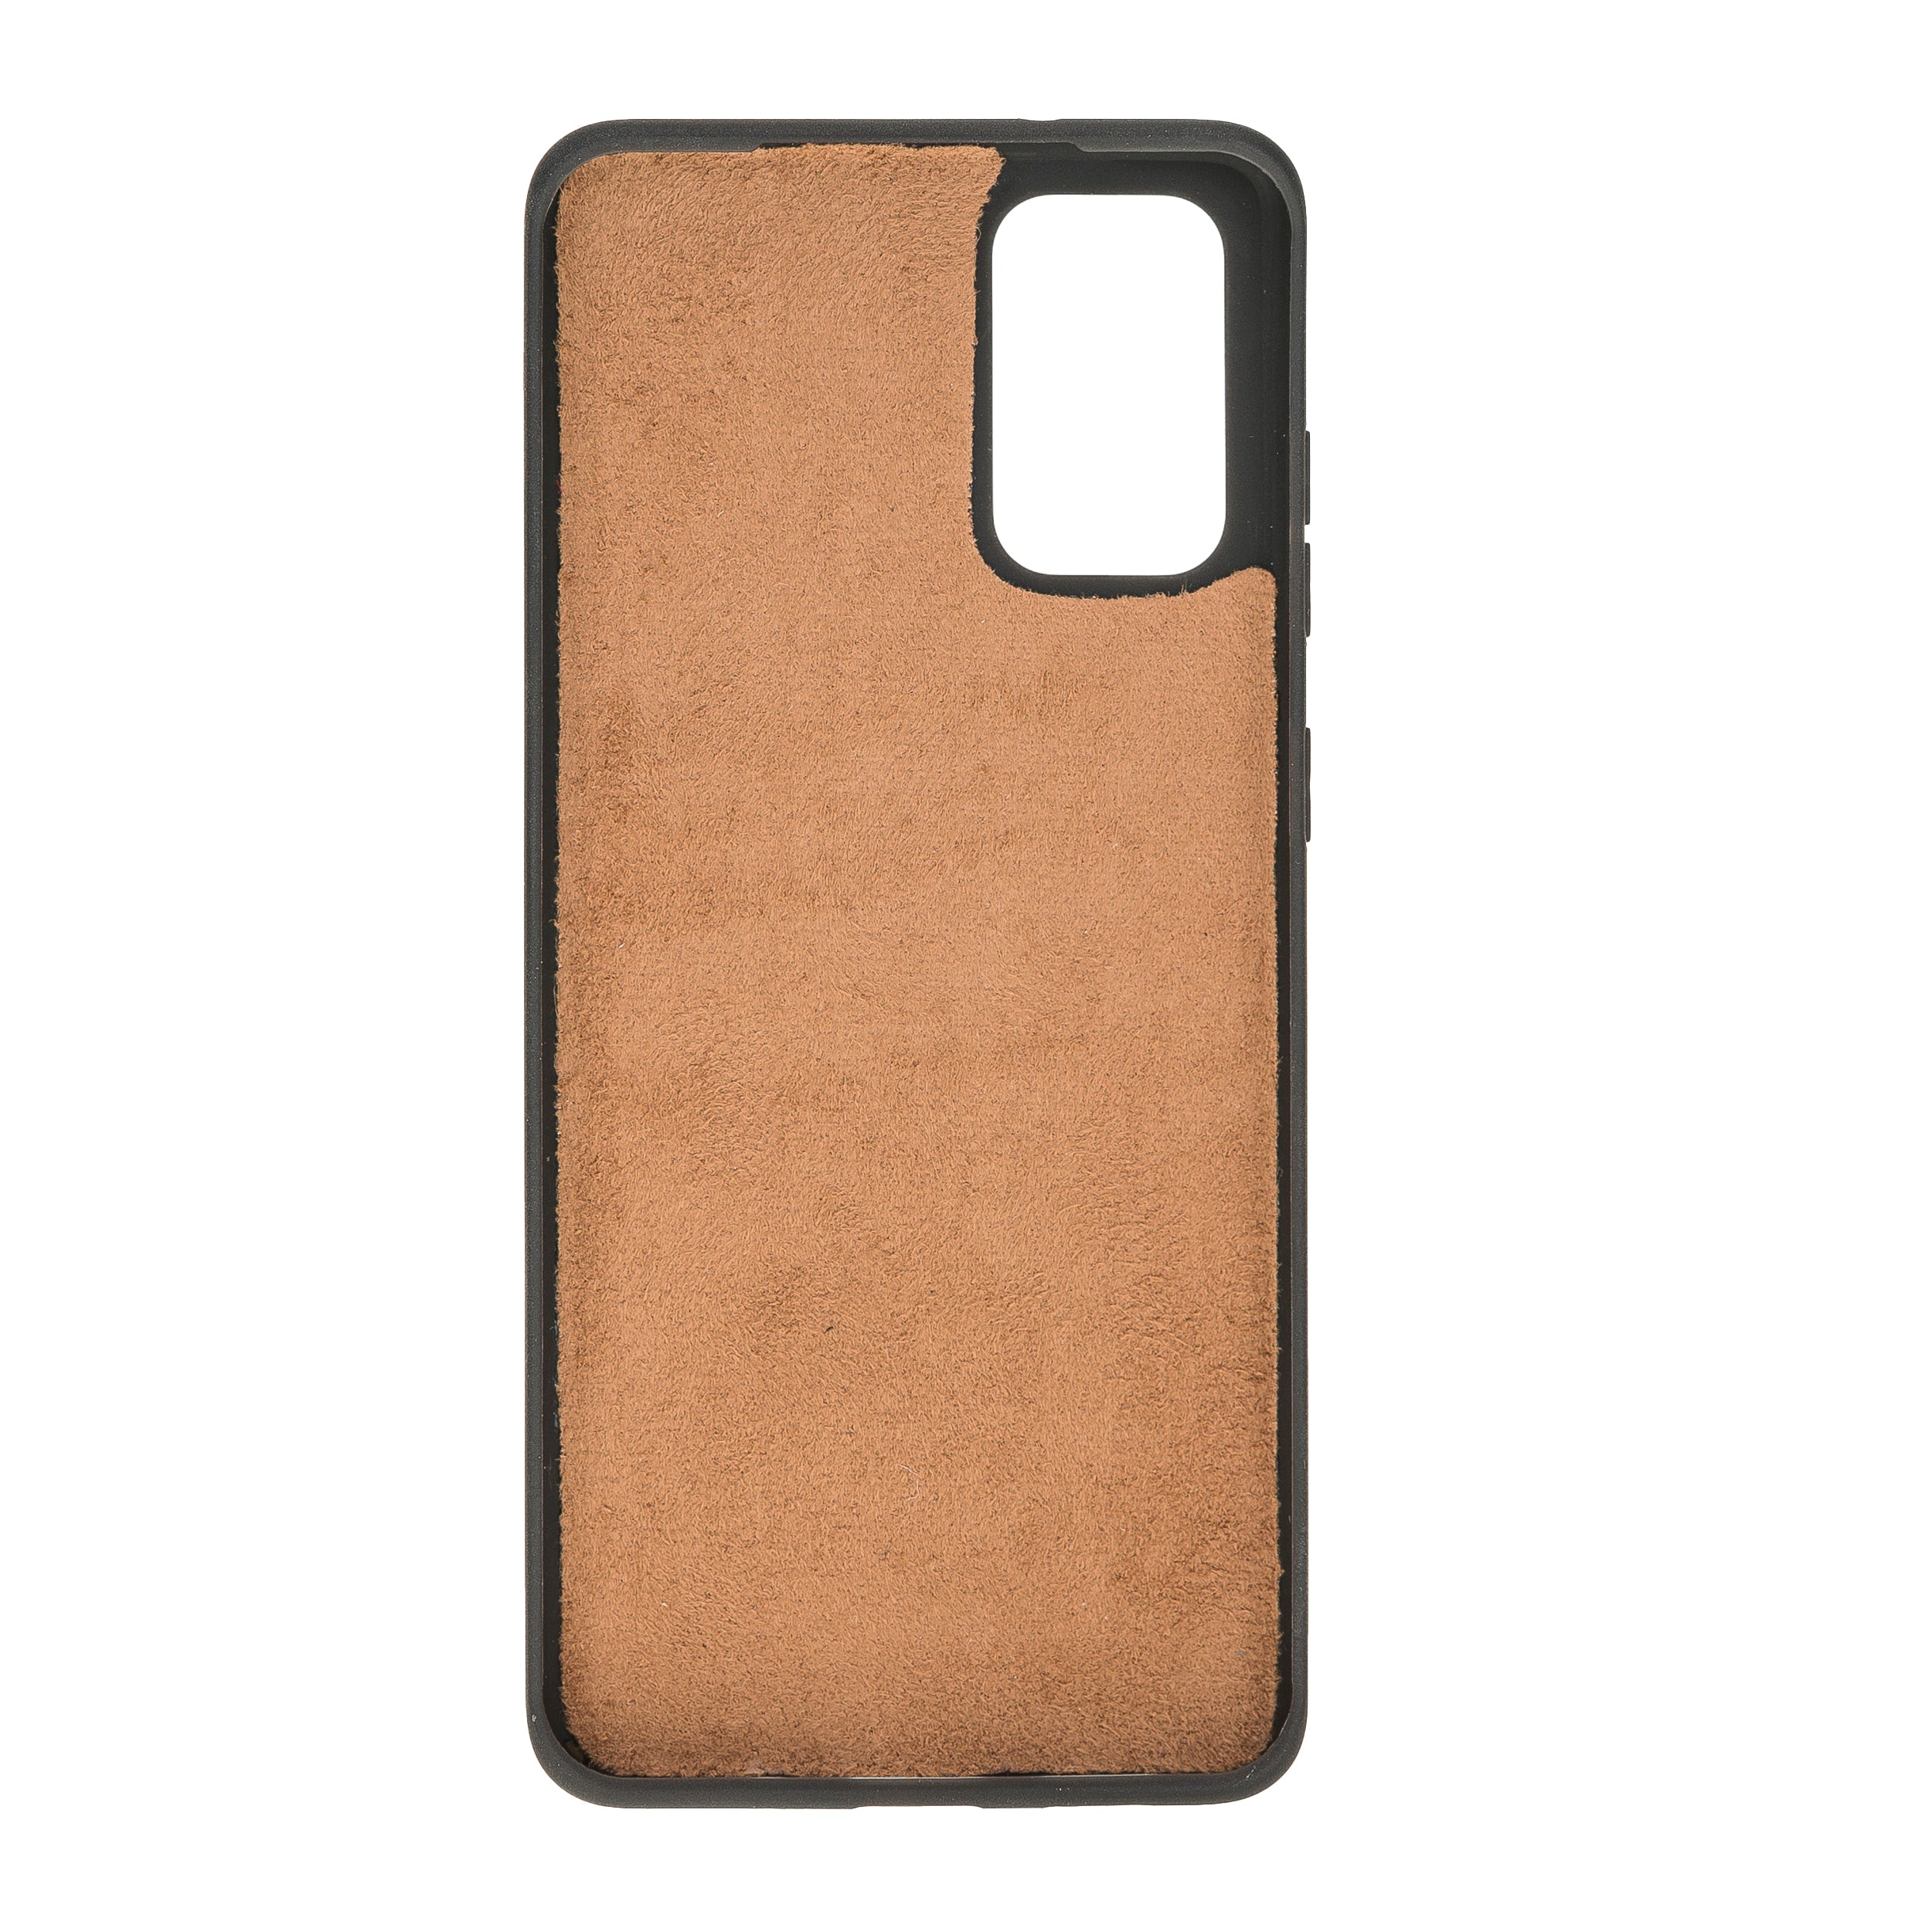 Samsung Galaxy S20 Plus Detachable Magnetic Wallet Folio Case Gold Gold| Gold by Caseco